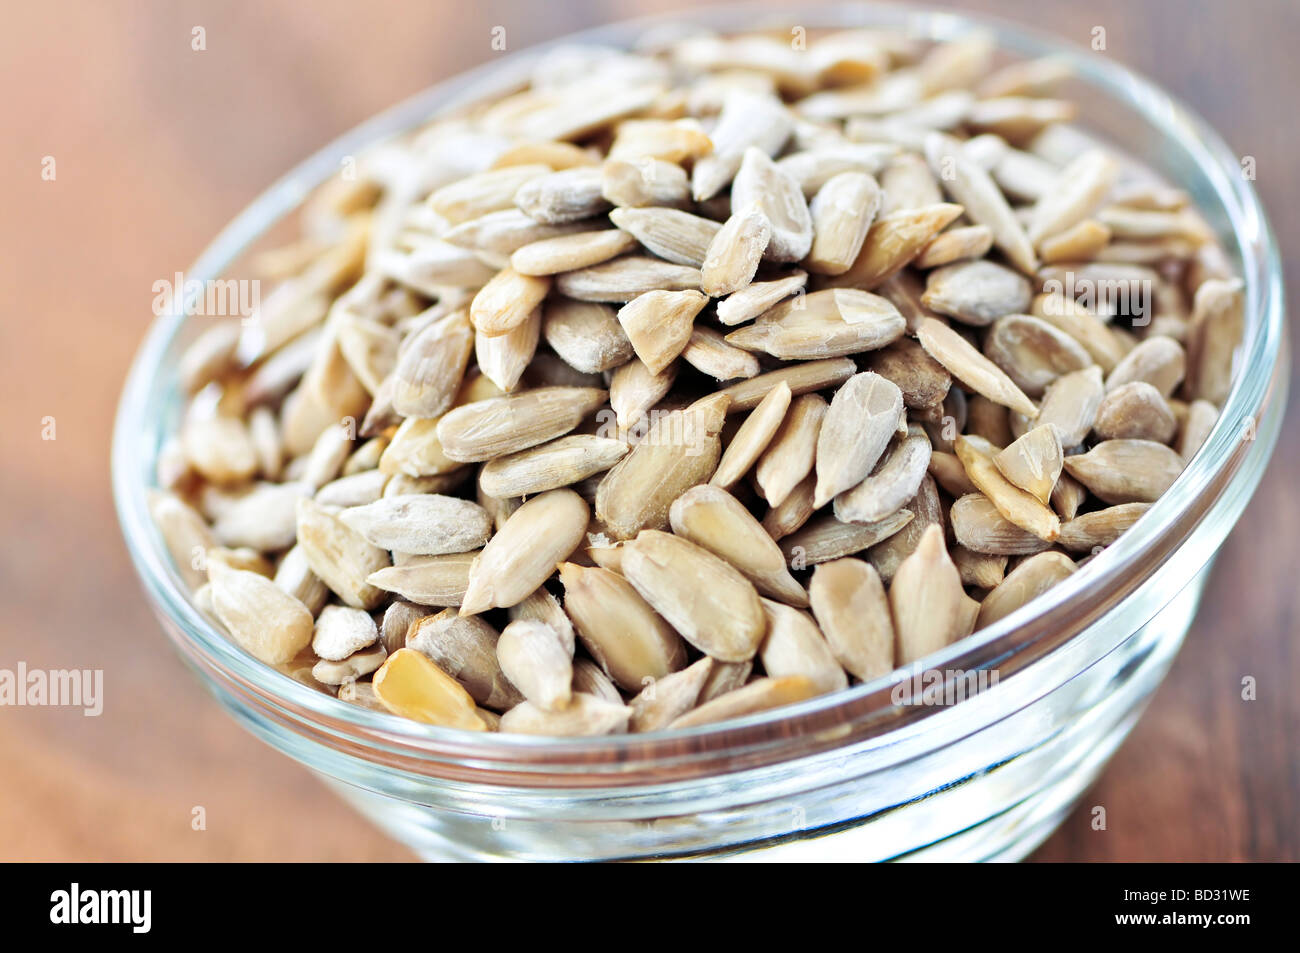 Shelled sunflower seeds close up in glass bowl Stock Photo